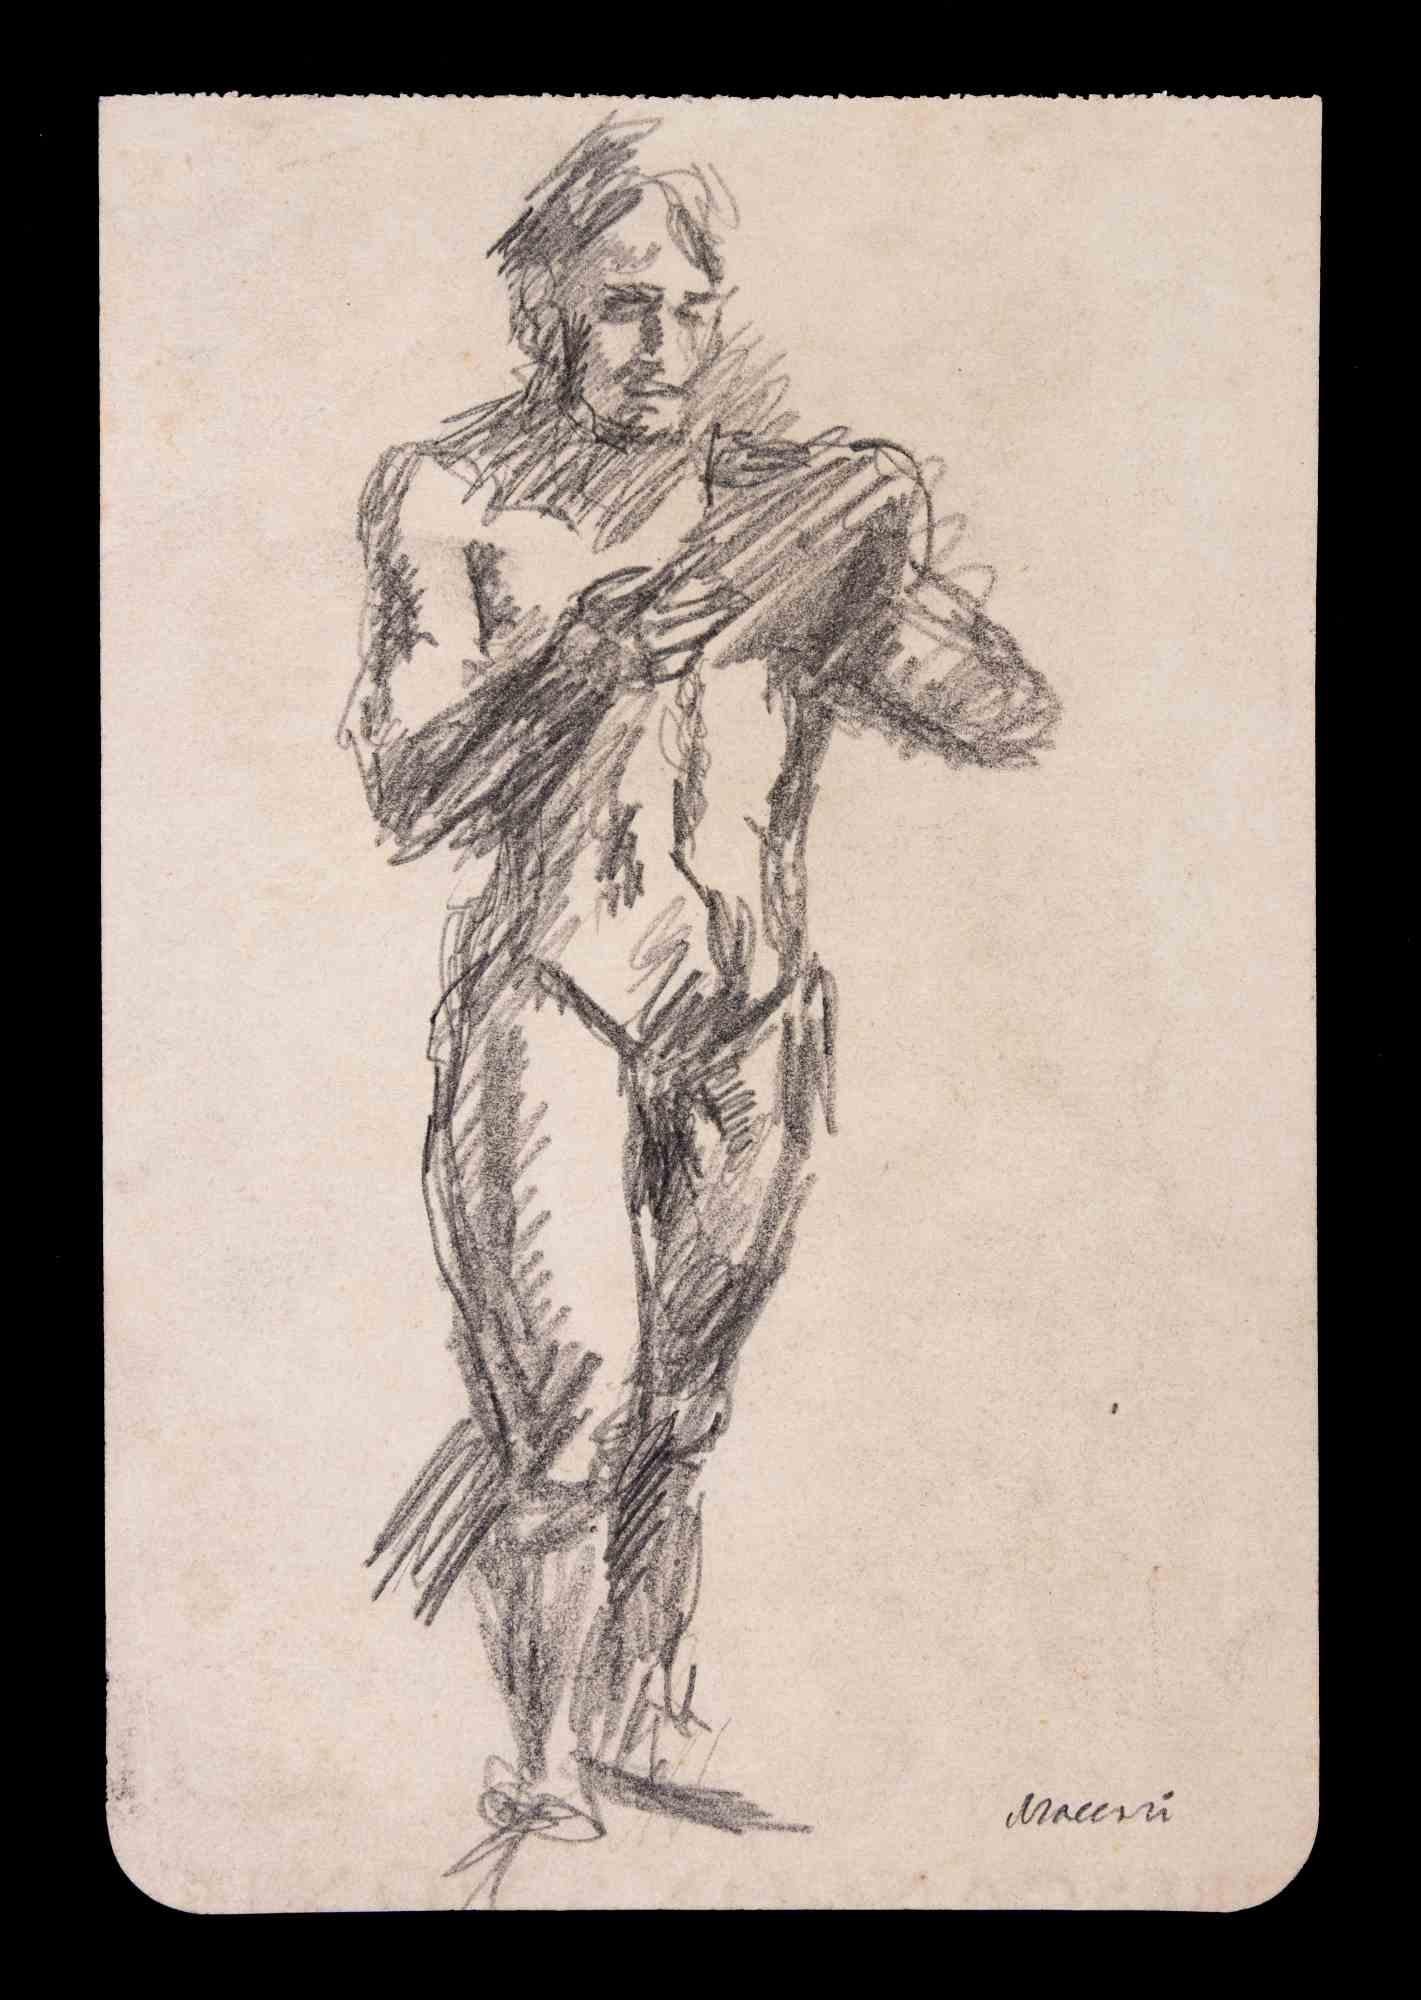 Reading Man is a Pencil Drawing realized by Mino Maccari  (1924-1989) in 1935.

Hand-signed on the lower margin.

Good condition on a little yellowed paper.

Mino Maccari (Siena, 1924-Rome, June 16, 1989) was an Italian writer, painter, engraver and